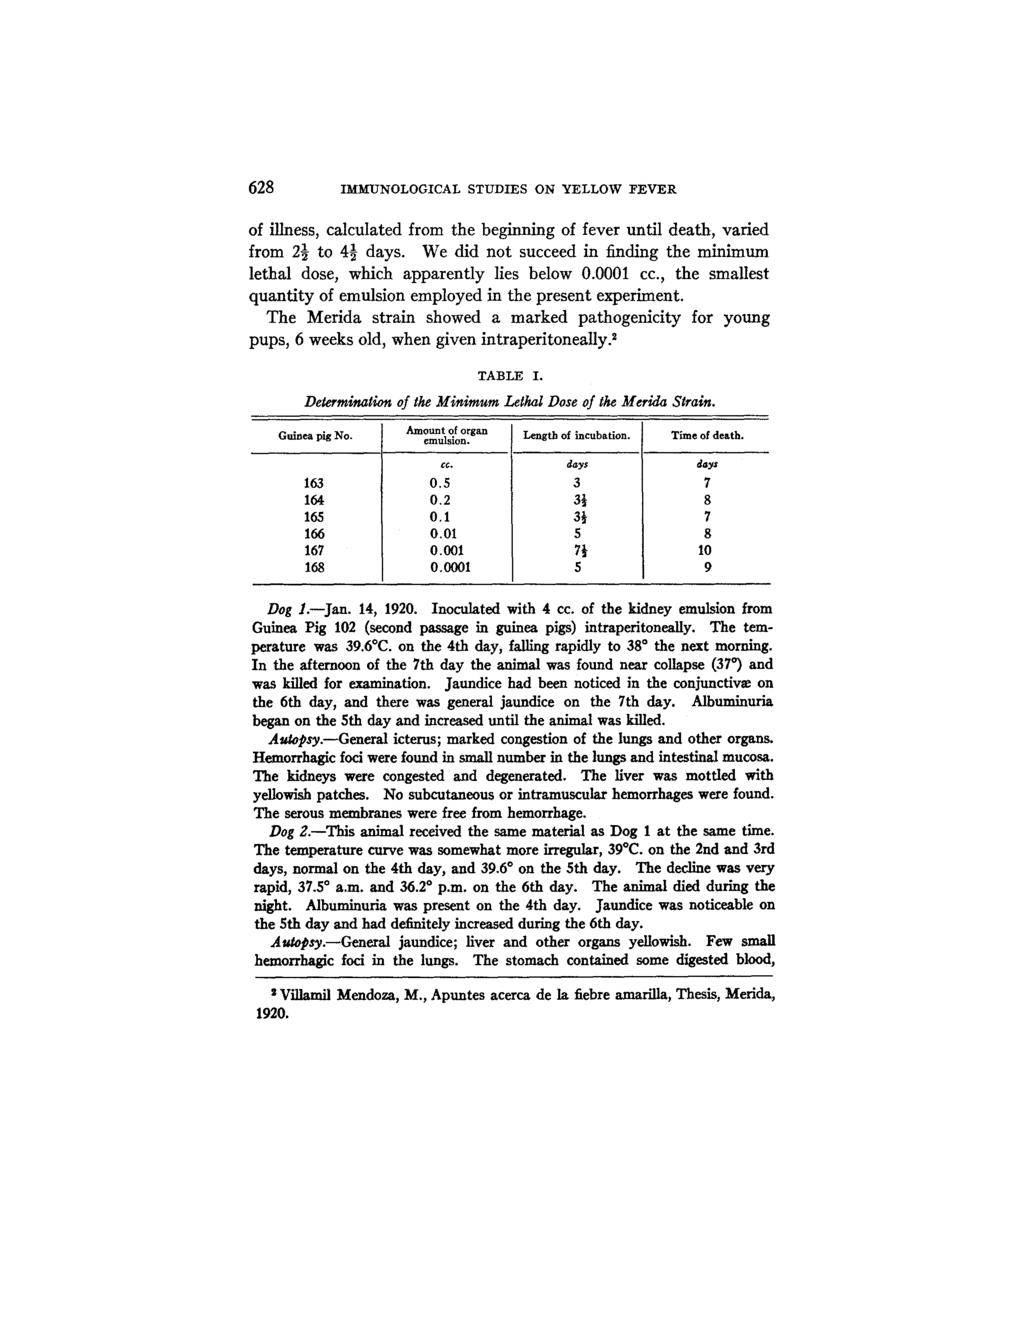 628 IMMUNOLOGICAL STUDIES ON YELLOW FEVER of illness, calculated from the beginning of fever until death, varied from 2½ to 4½ days.